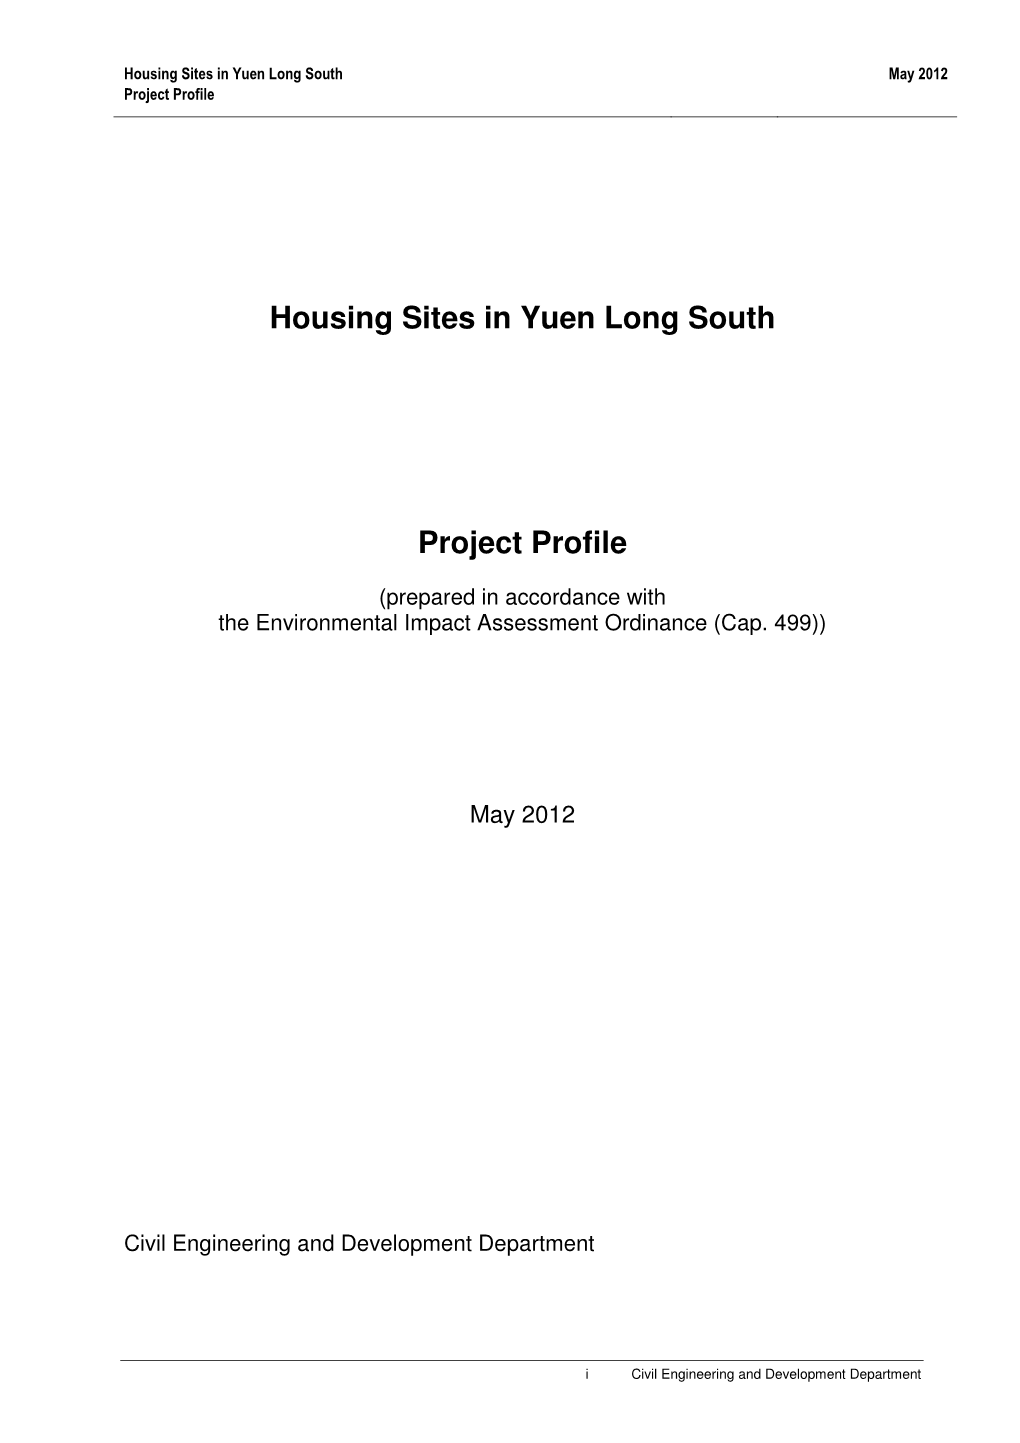 Housing Sites in Yuen Long South Project Profile